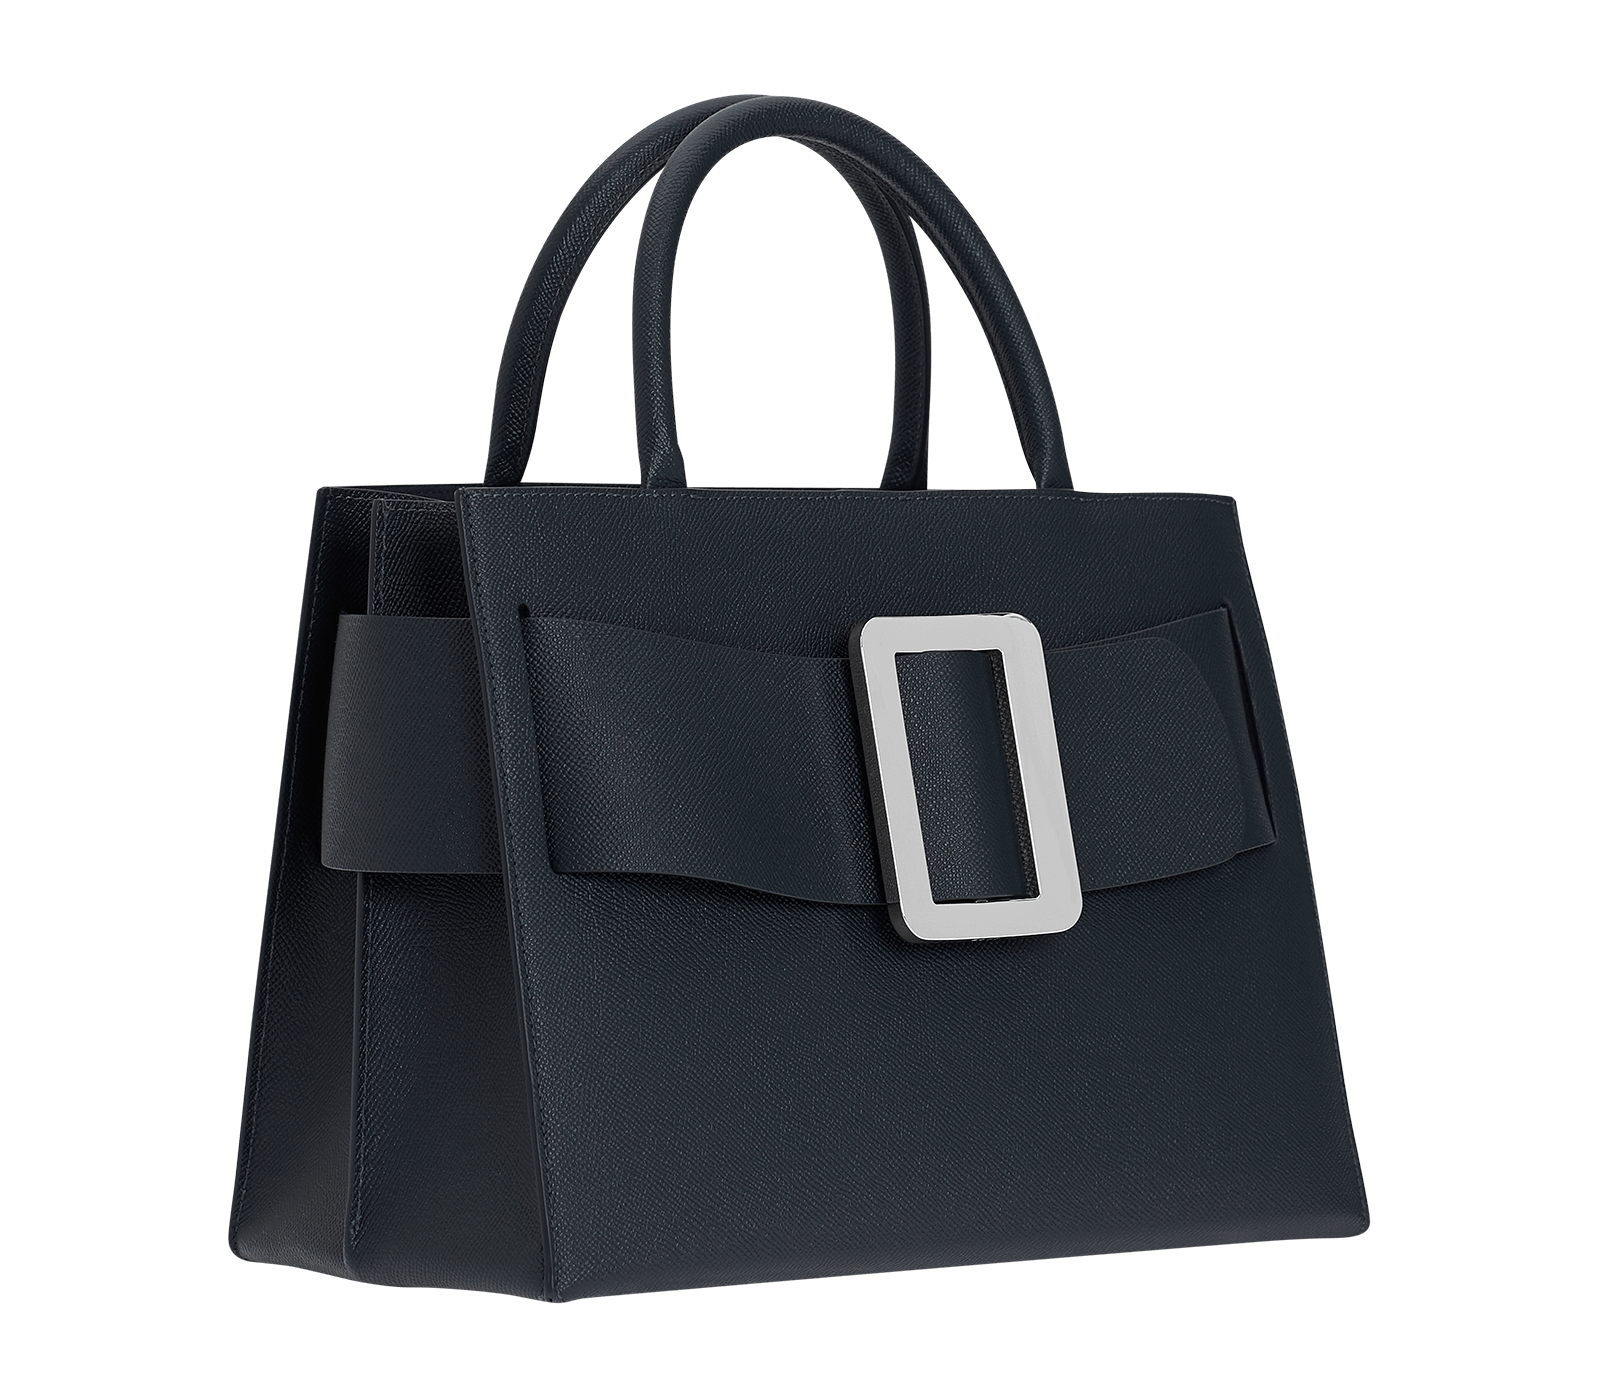 Large, structured blue handbag with a large silver buckle on the front, carry strap, and twin handles. Made with grained calfskin leather.